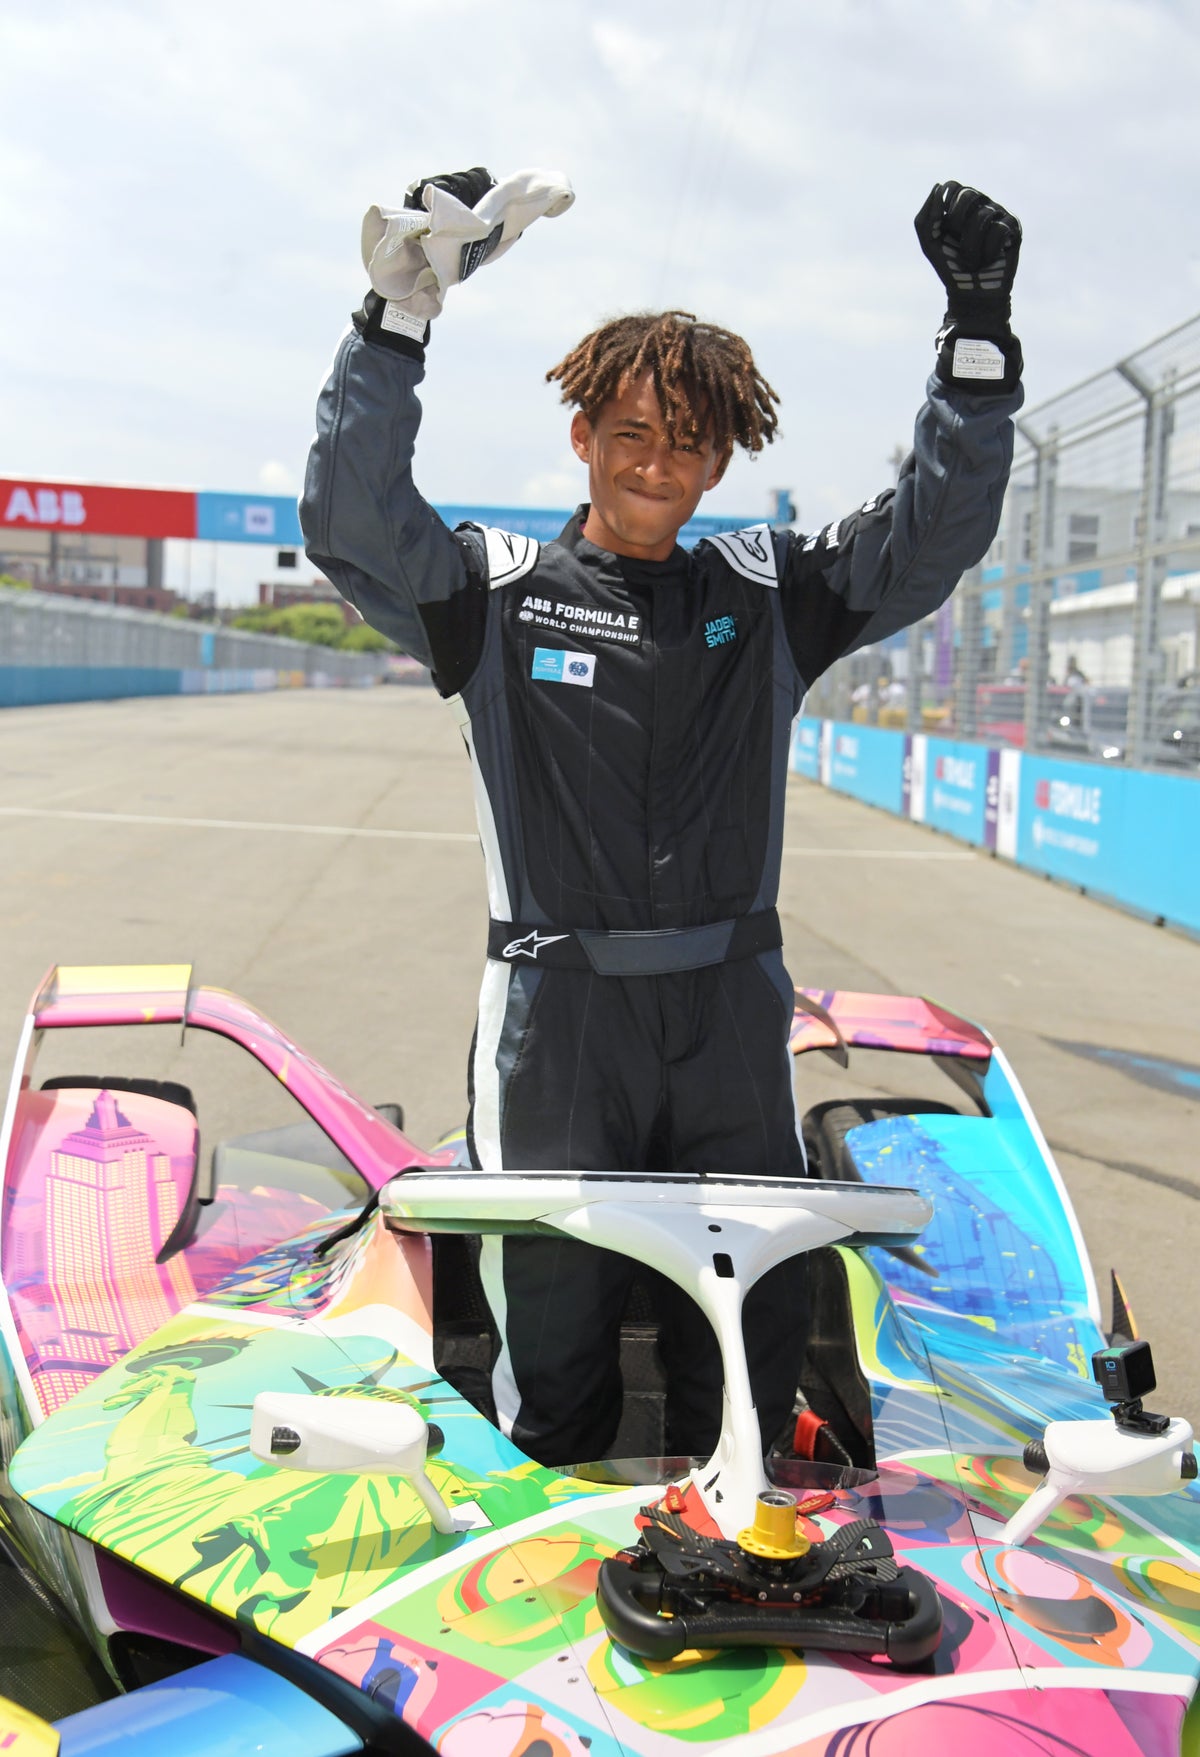 Jaden Smith says Formula E will one day be more popular than Formula One